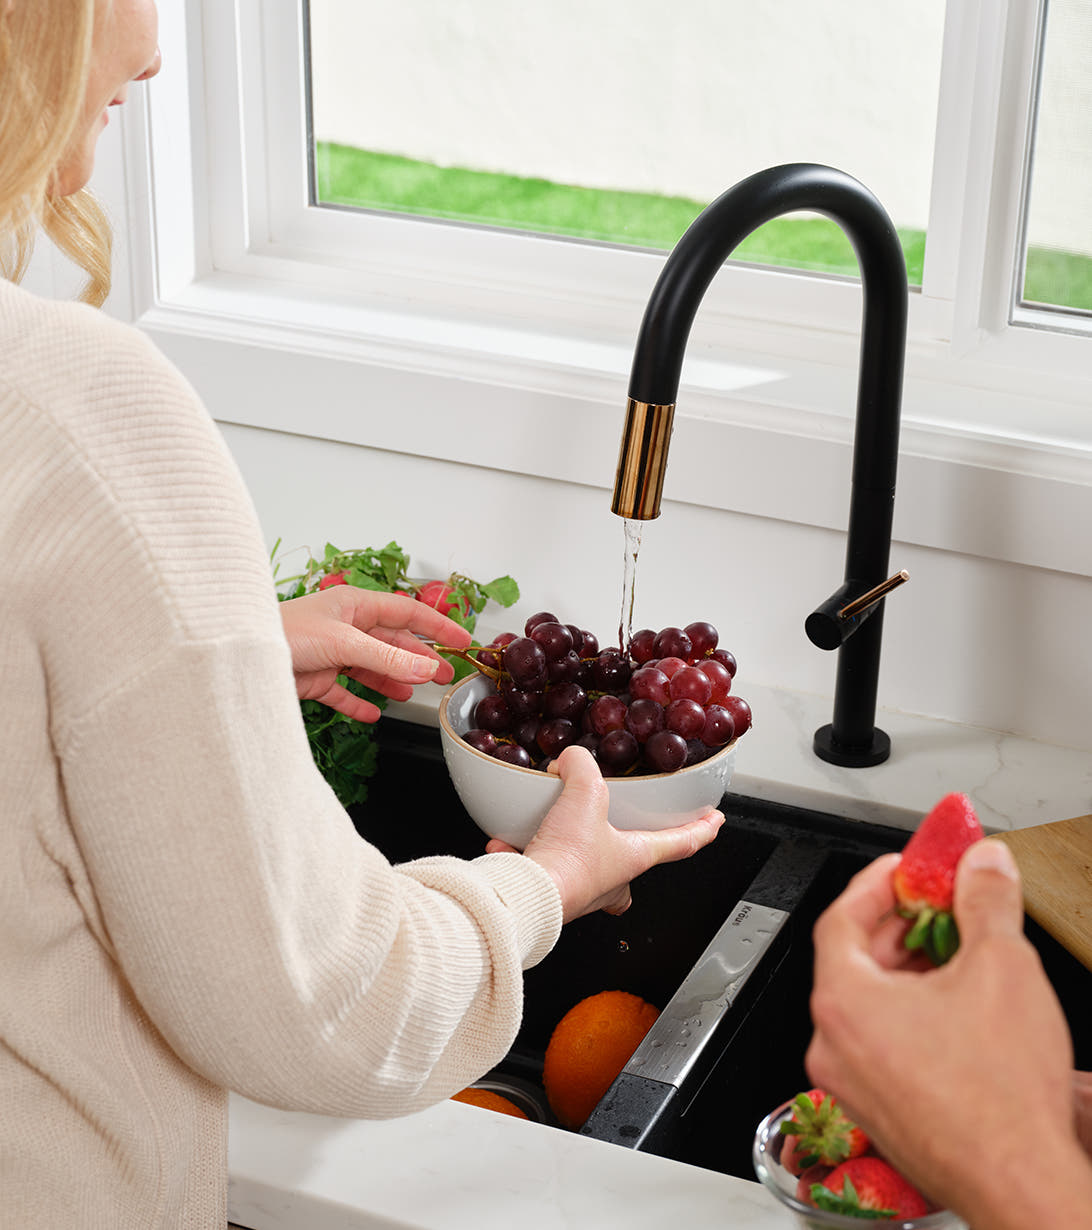 Introducing An All-Purpose System For Any Sink